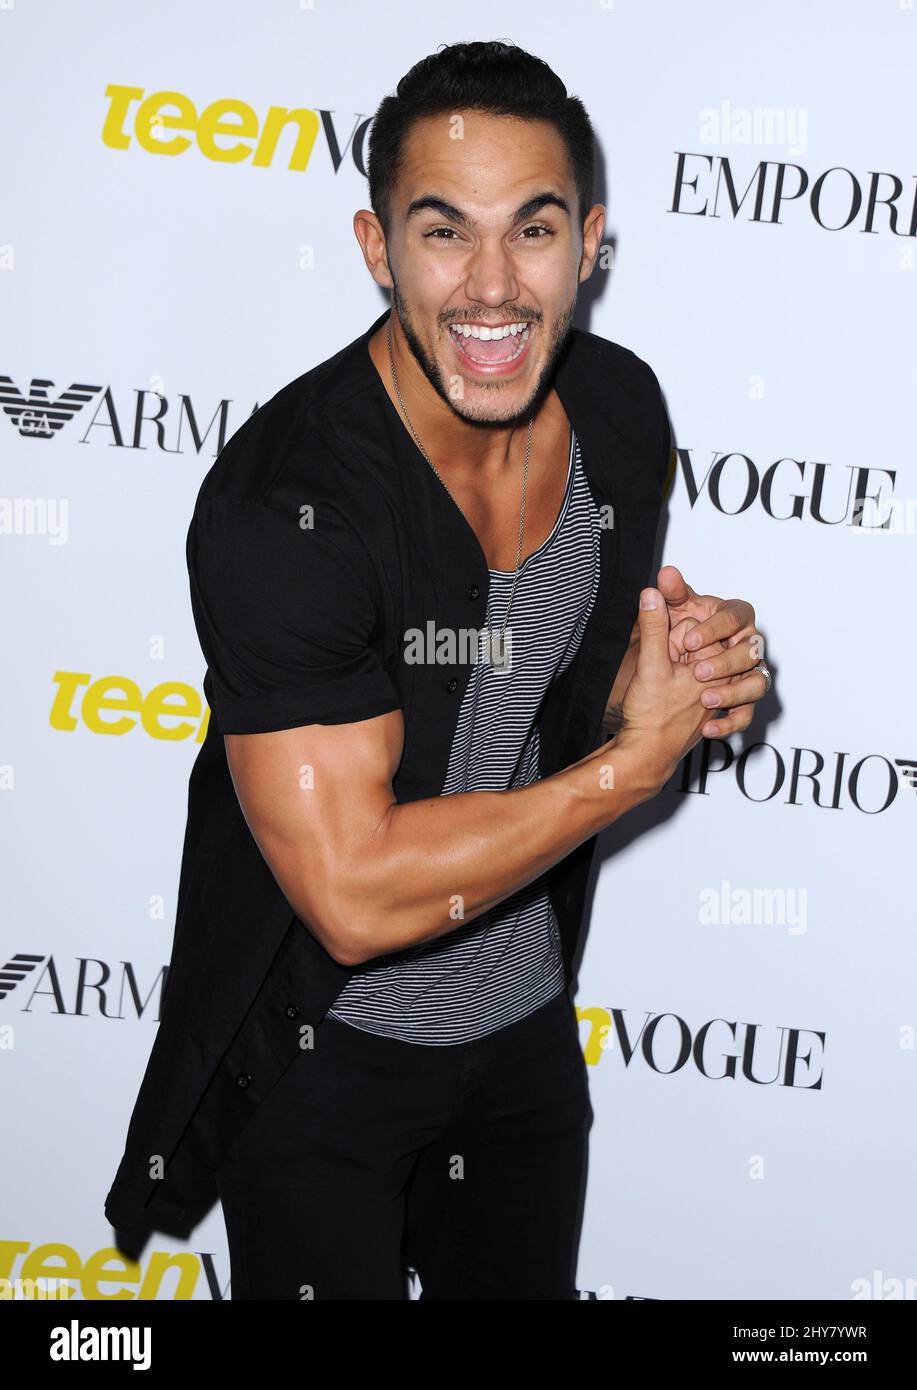 Carlos Pena attending the 13th Annual Teen Vogue Young Hollywood party in Los Angeles, California. Stock Photo